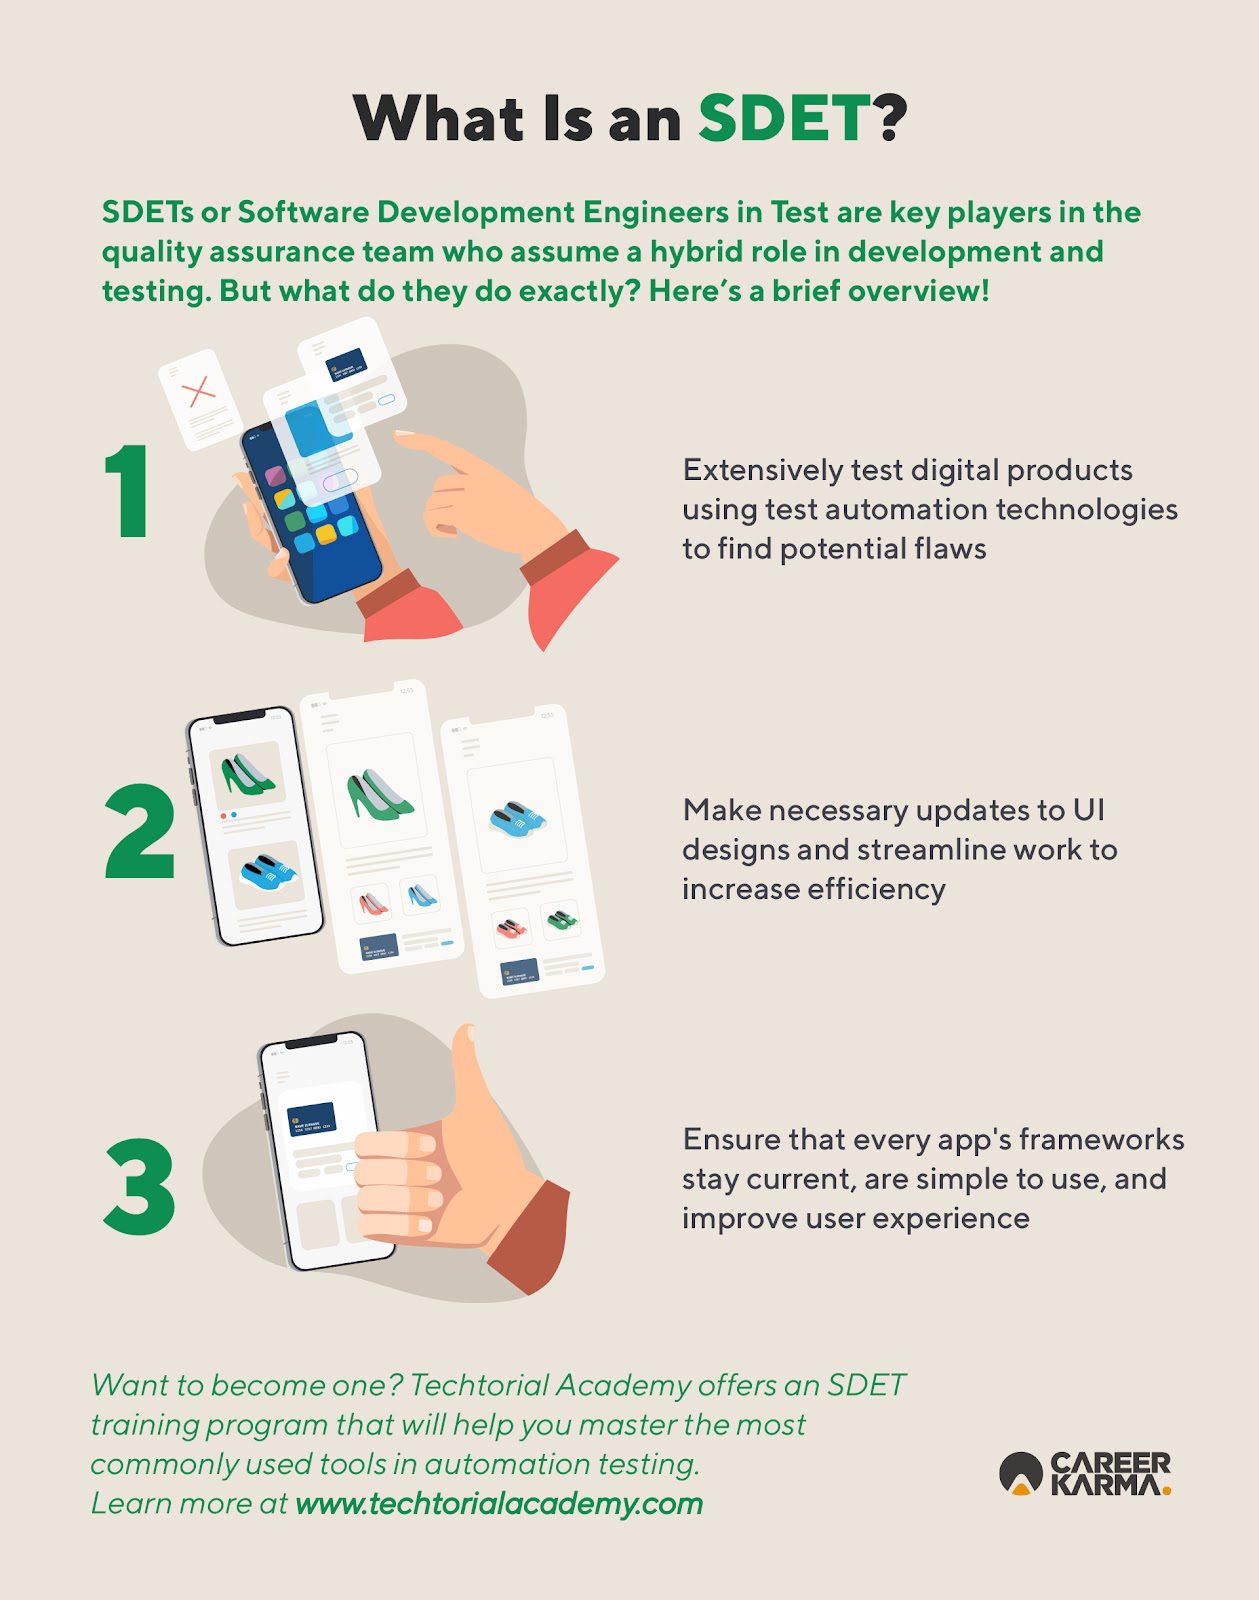 An infographic listing the main responsibilities of an Software Development Engineer in Test